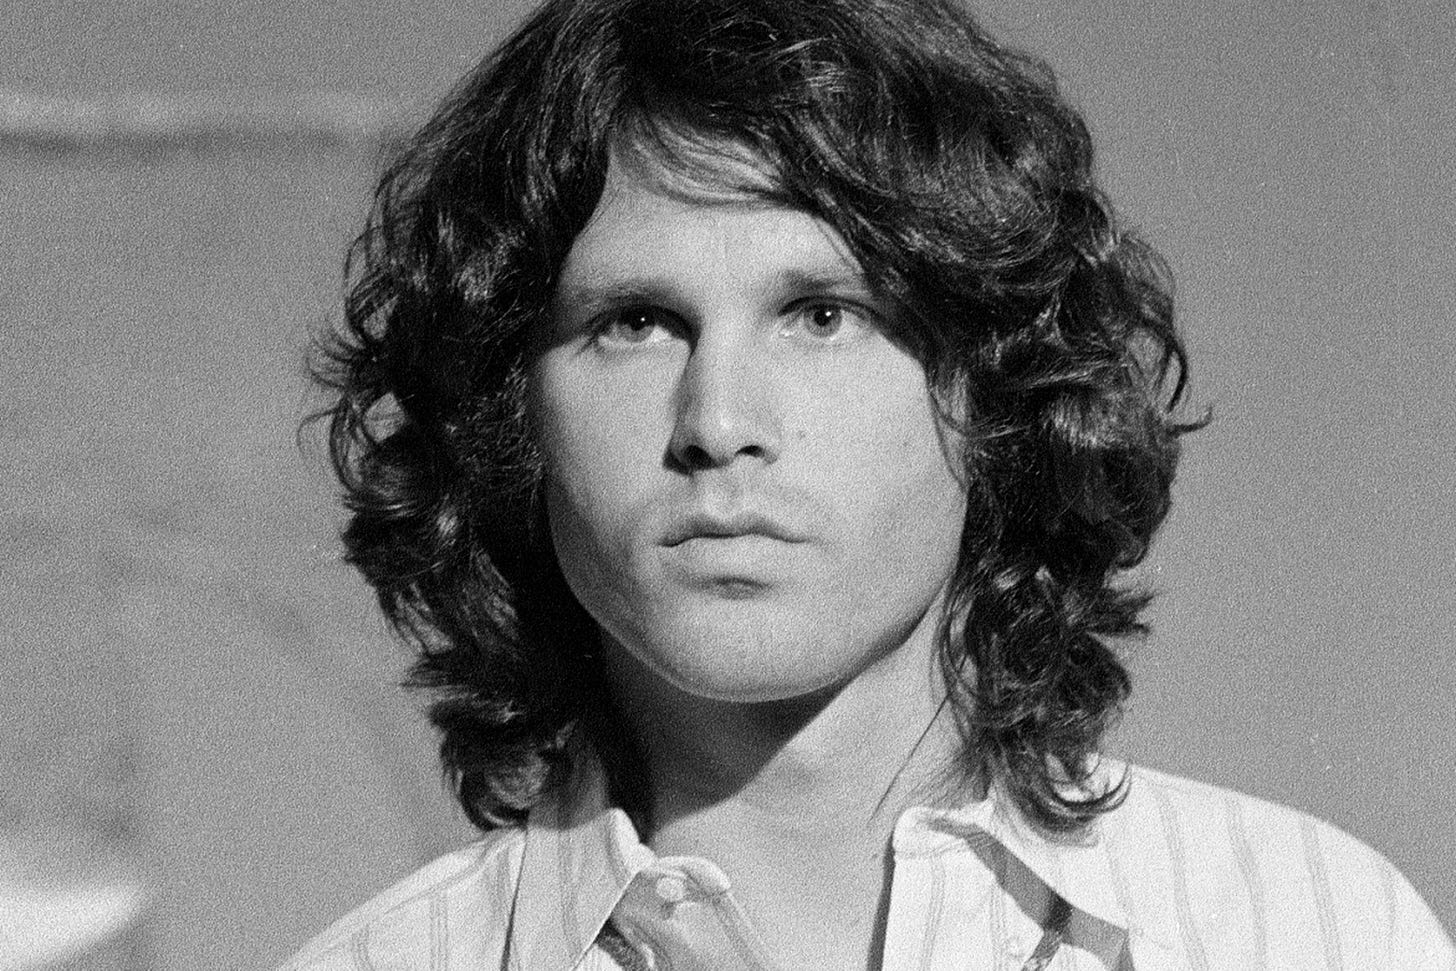 Jim Morrison: Rolling Stone Interview With the Doors' Singer